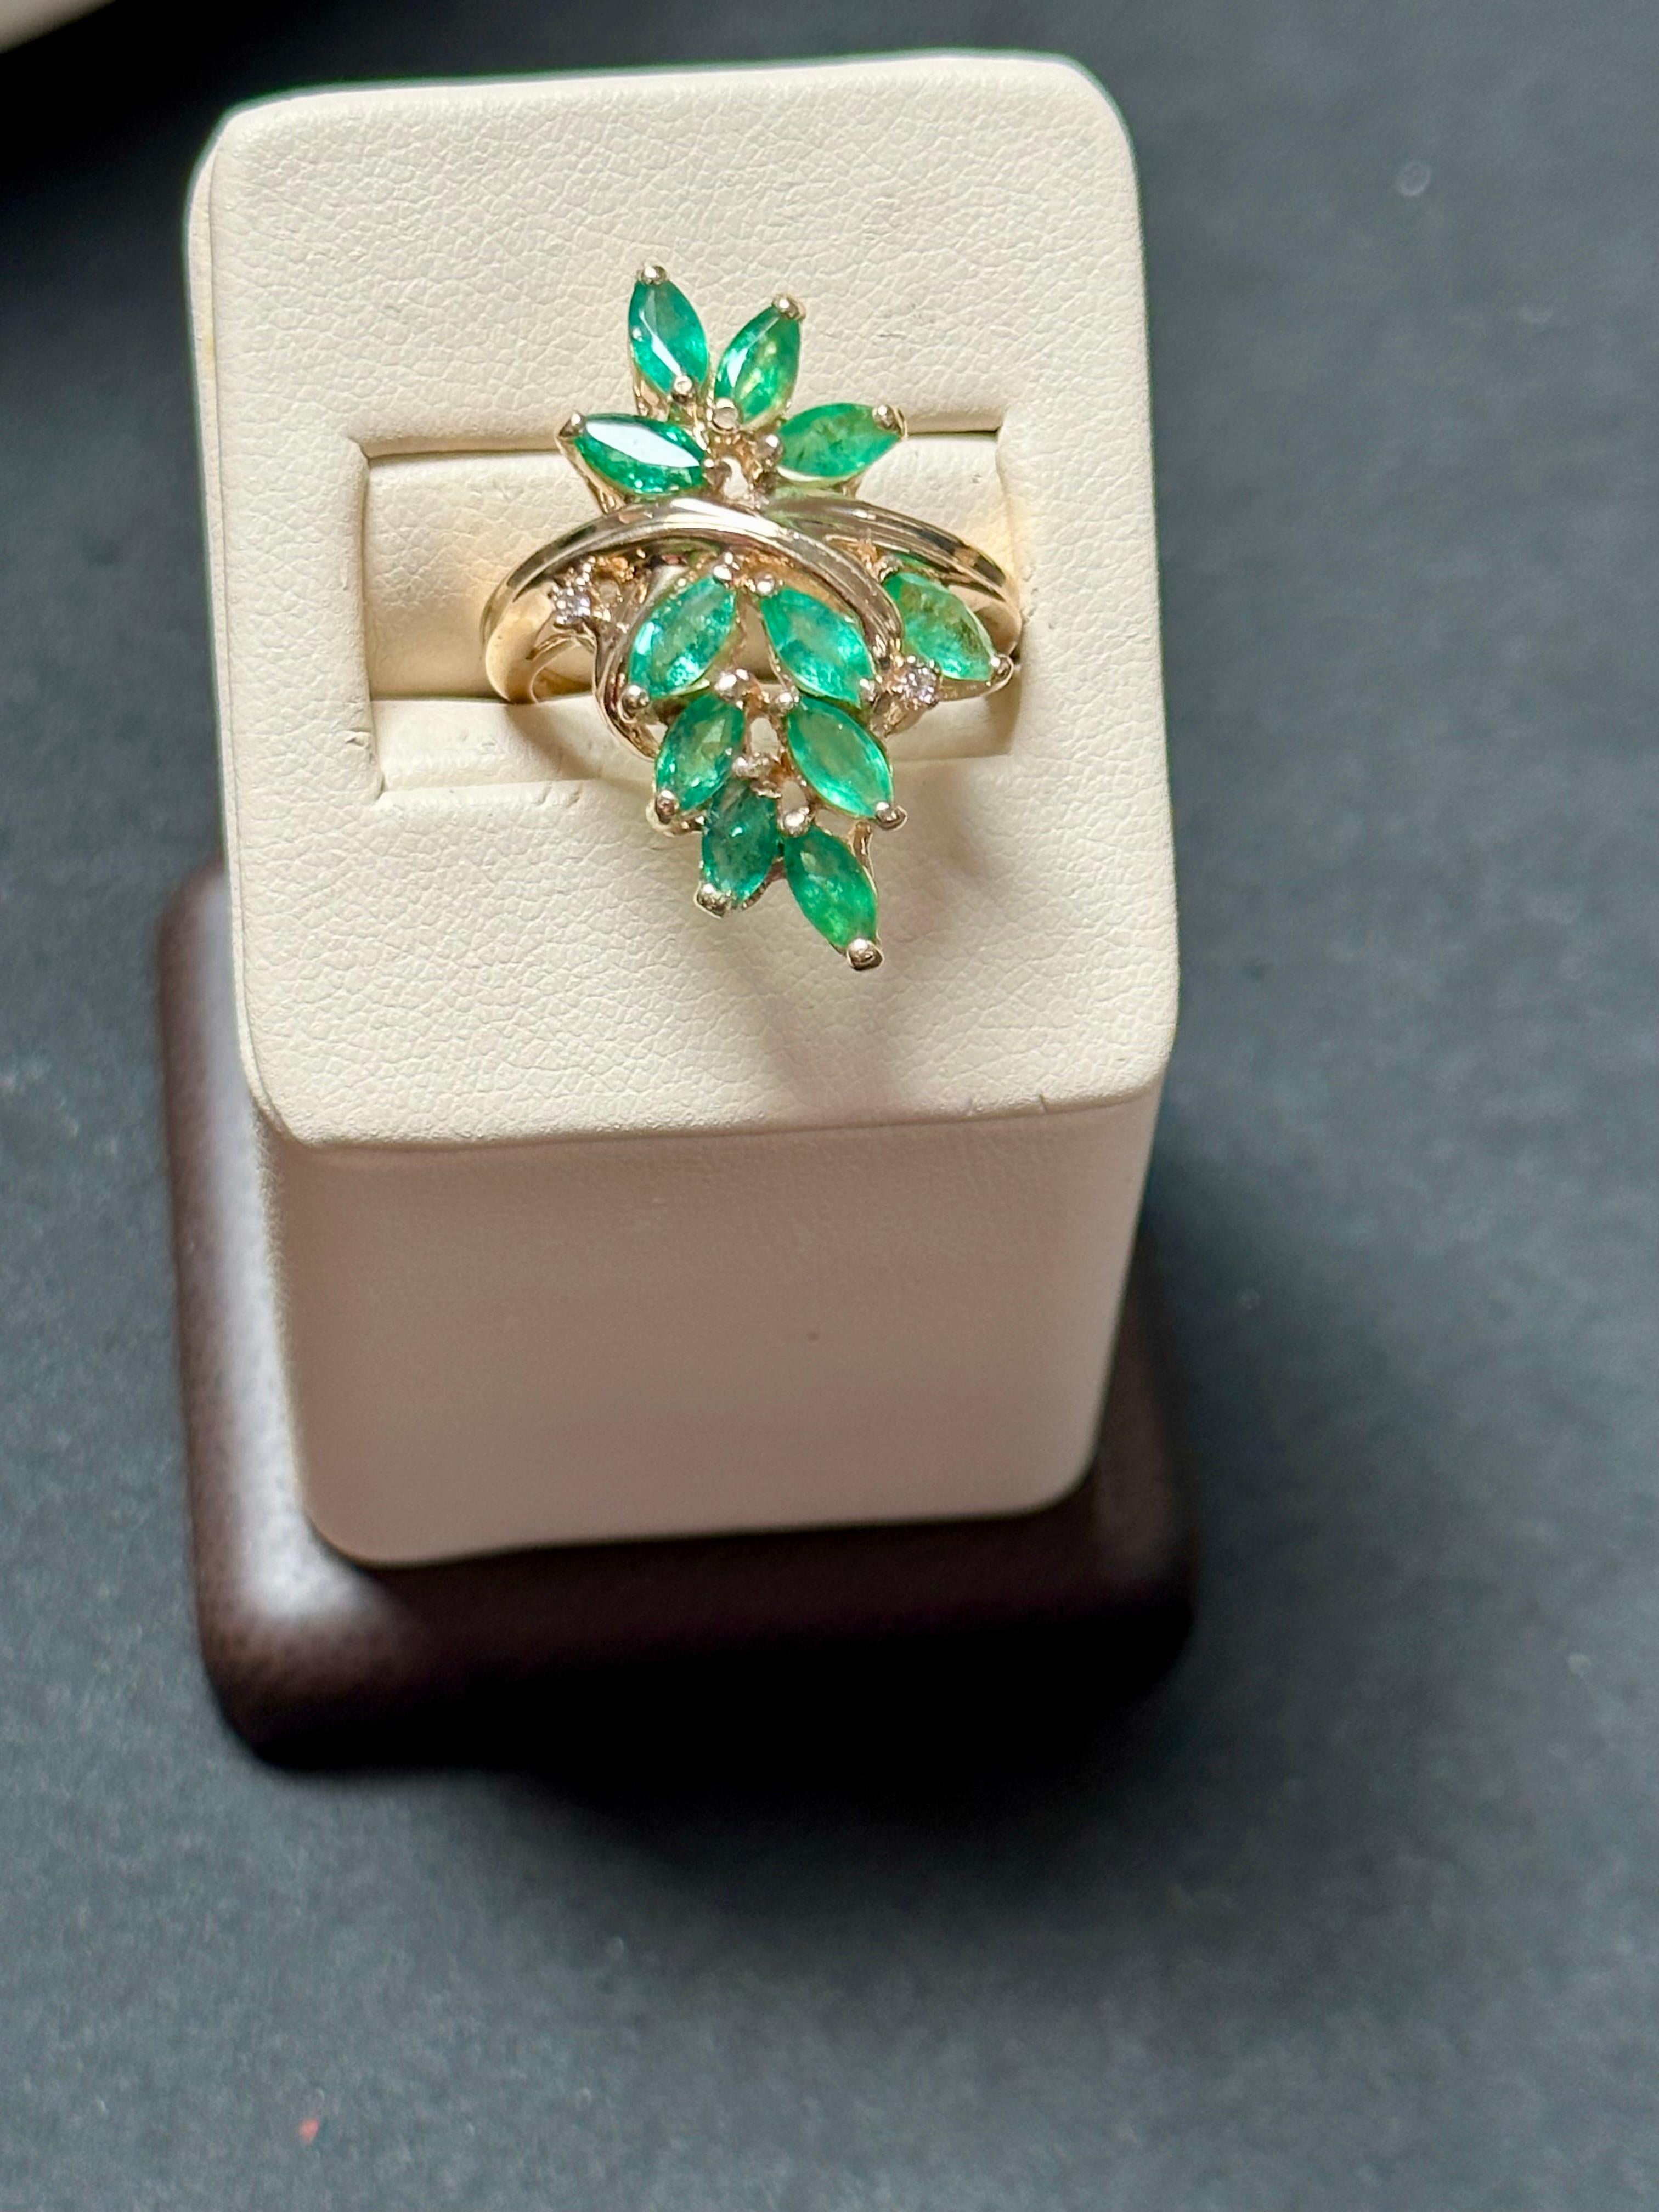 Introducing our exquisite 14 Karat Yellow Gold Ring featuring a collection of natural Brazilian emeralds and two tiny diamonds. This captivating ring showcases multiple marquise-shaped emeralds, known for their elegant and elongated form.

The total